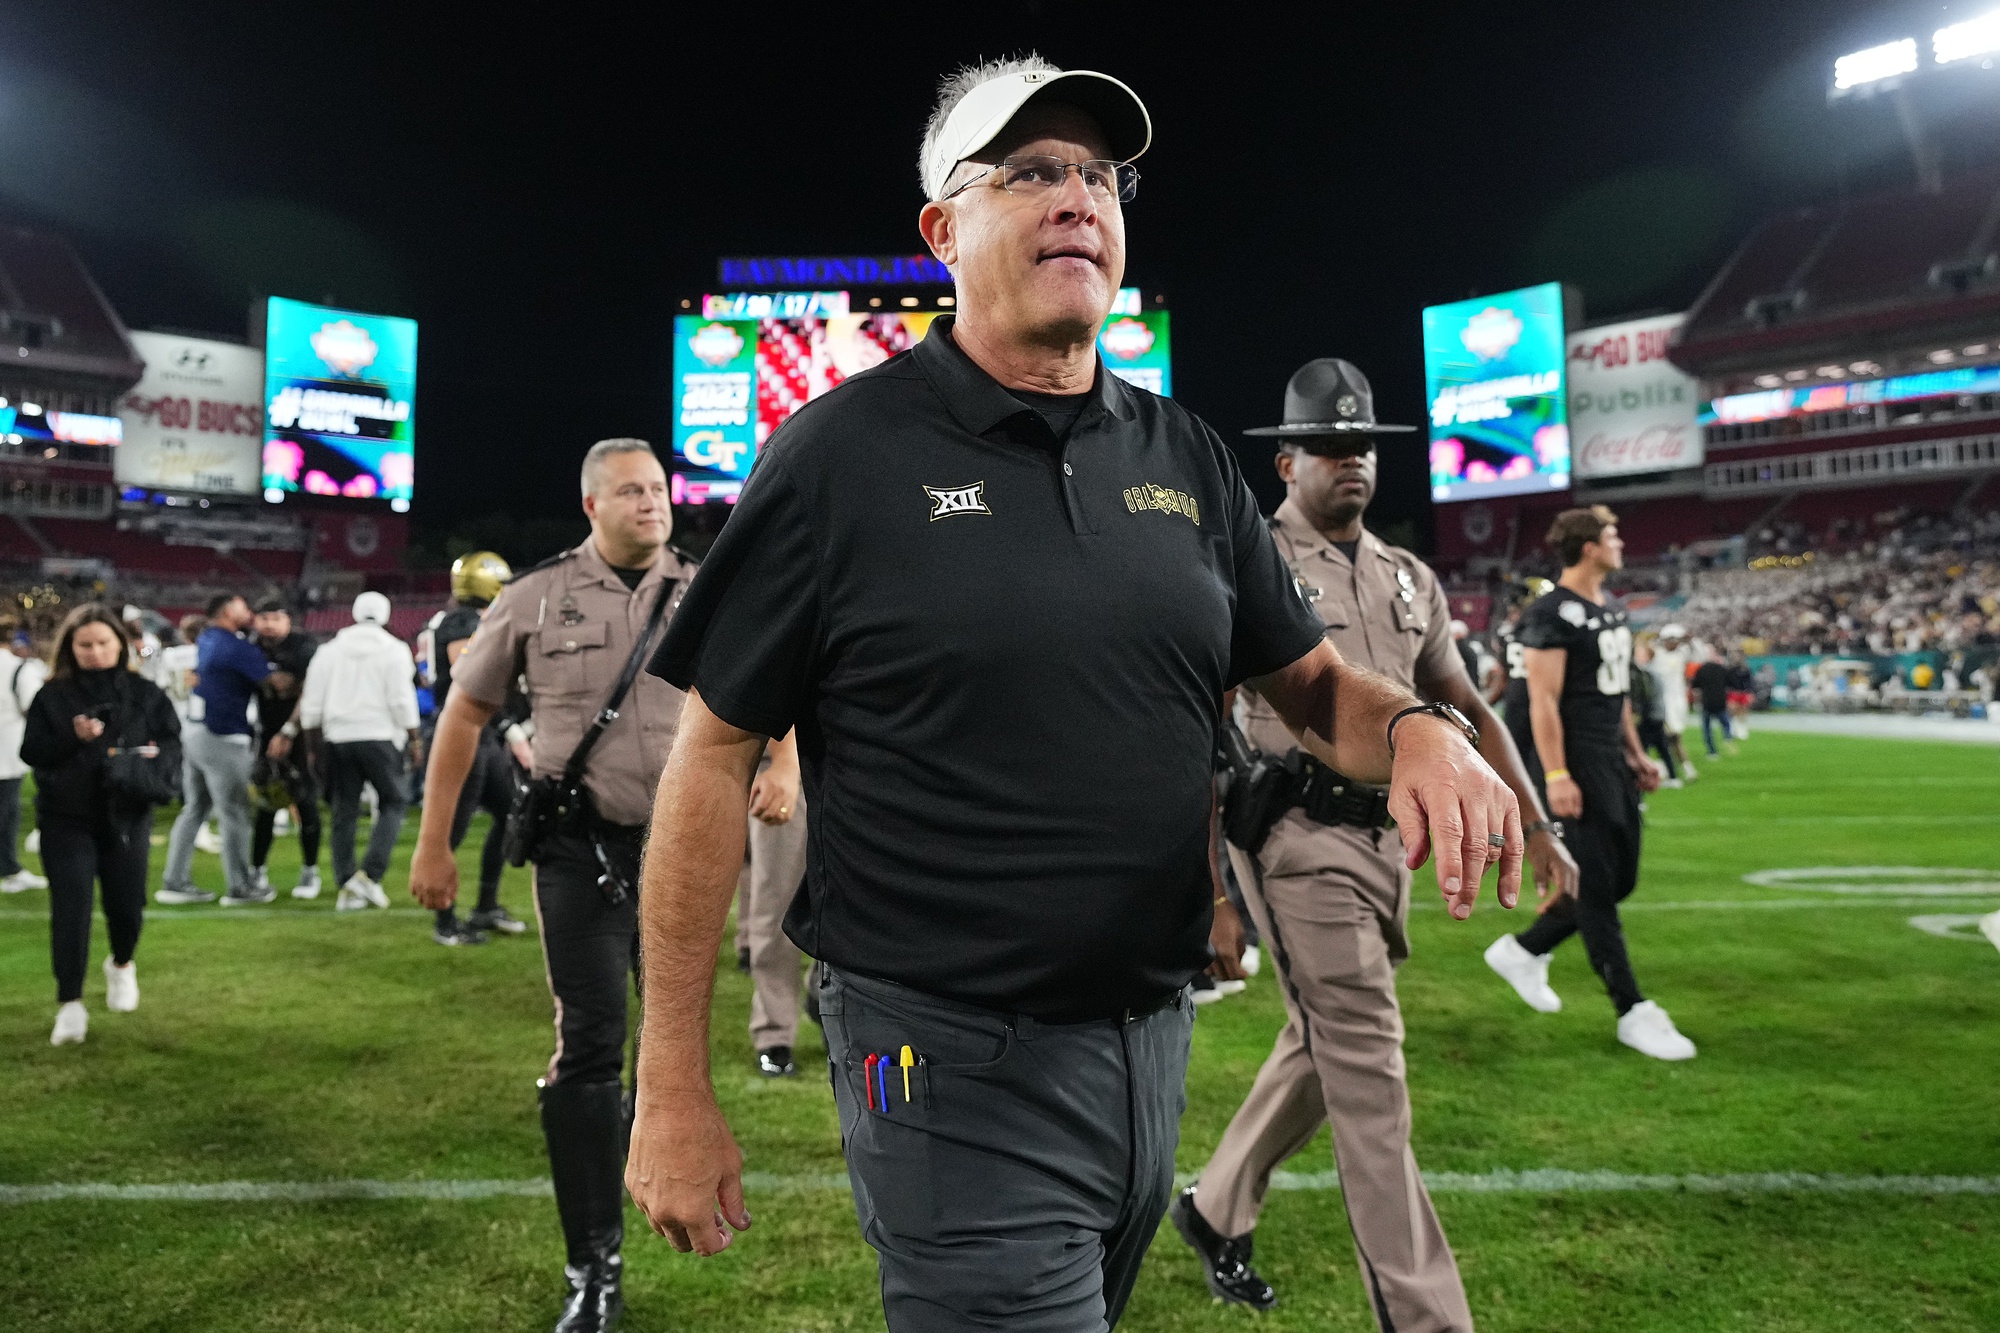 Off the Cuff: UCF Spring Games are for the Fans